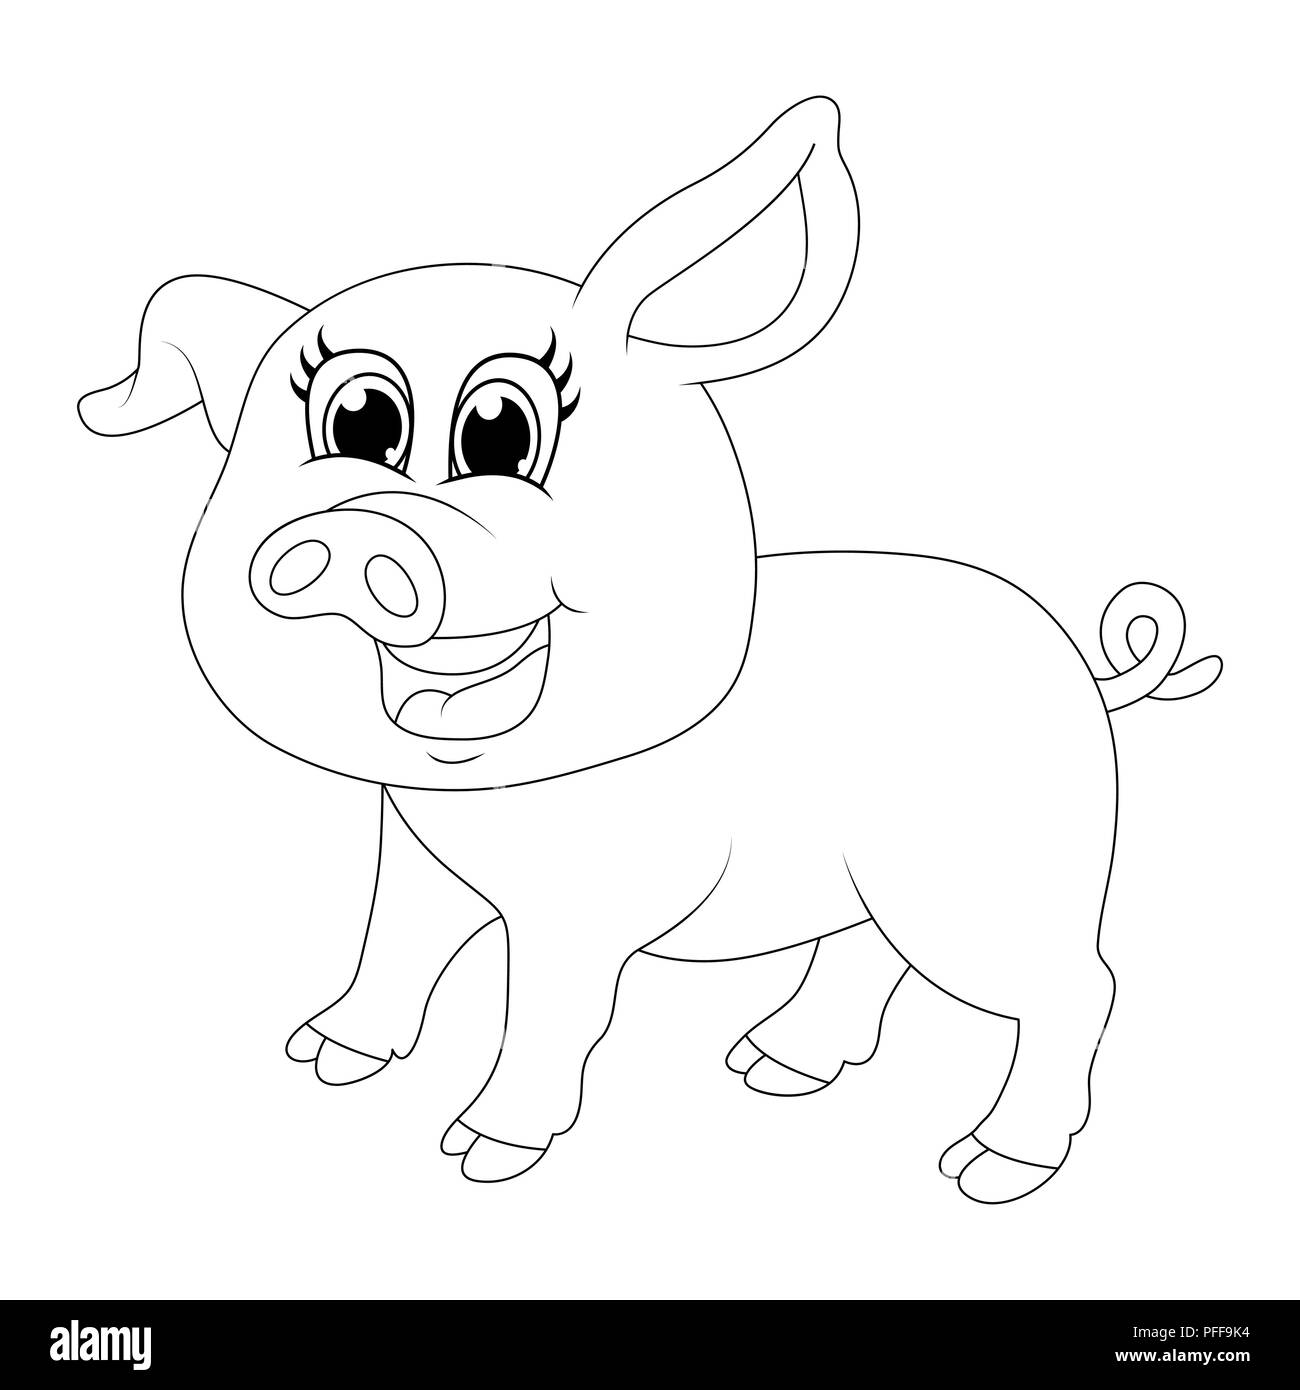 pig cartoon character vector design isolated on white background Stock Vector